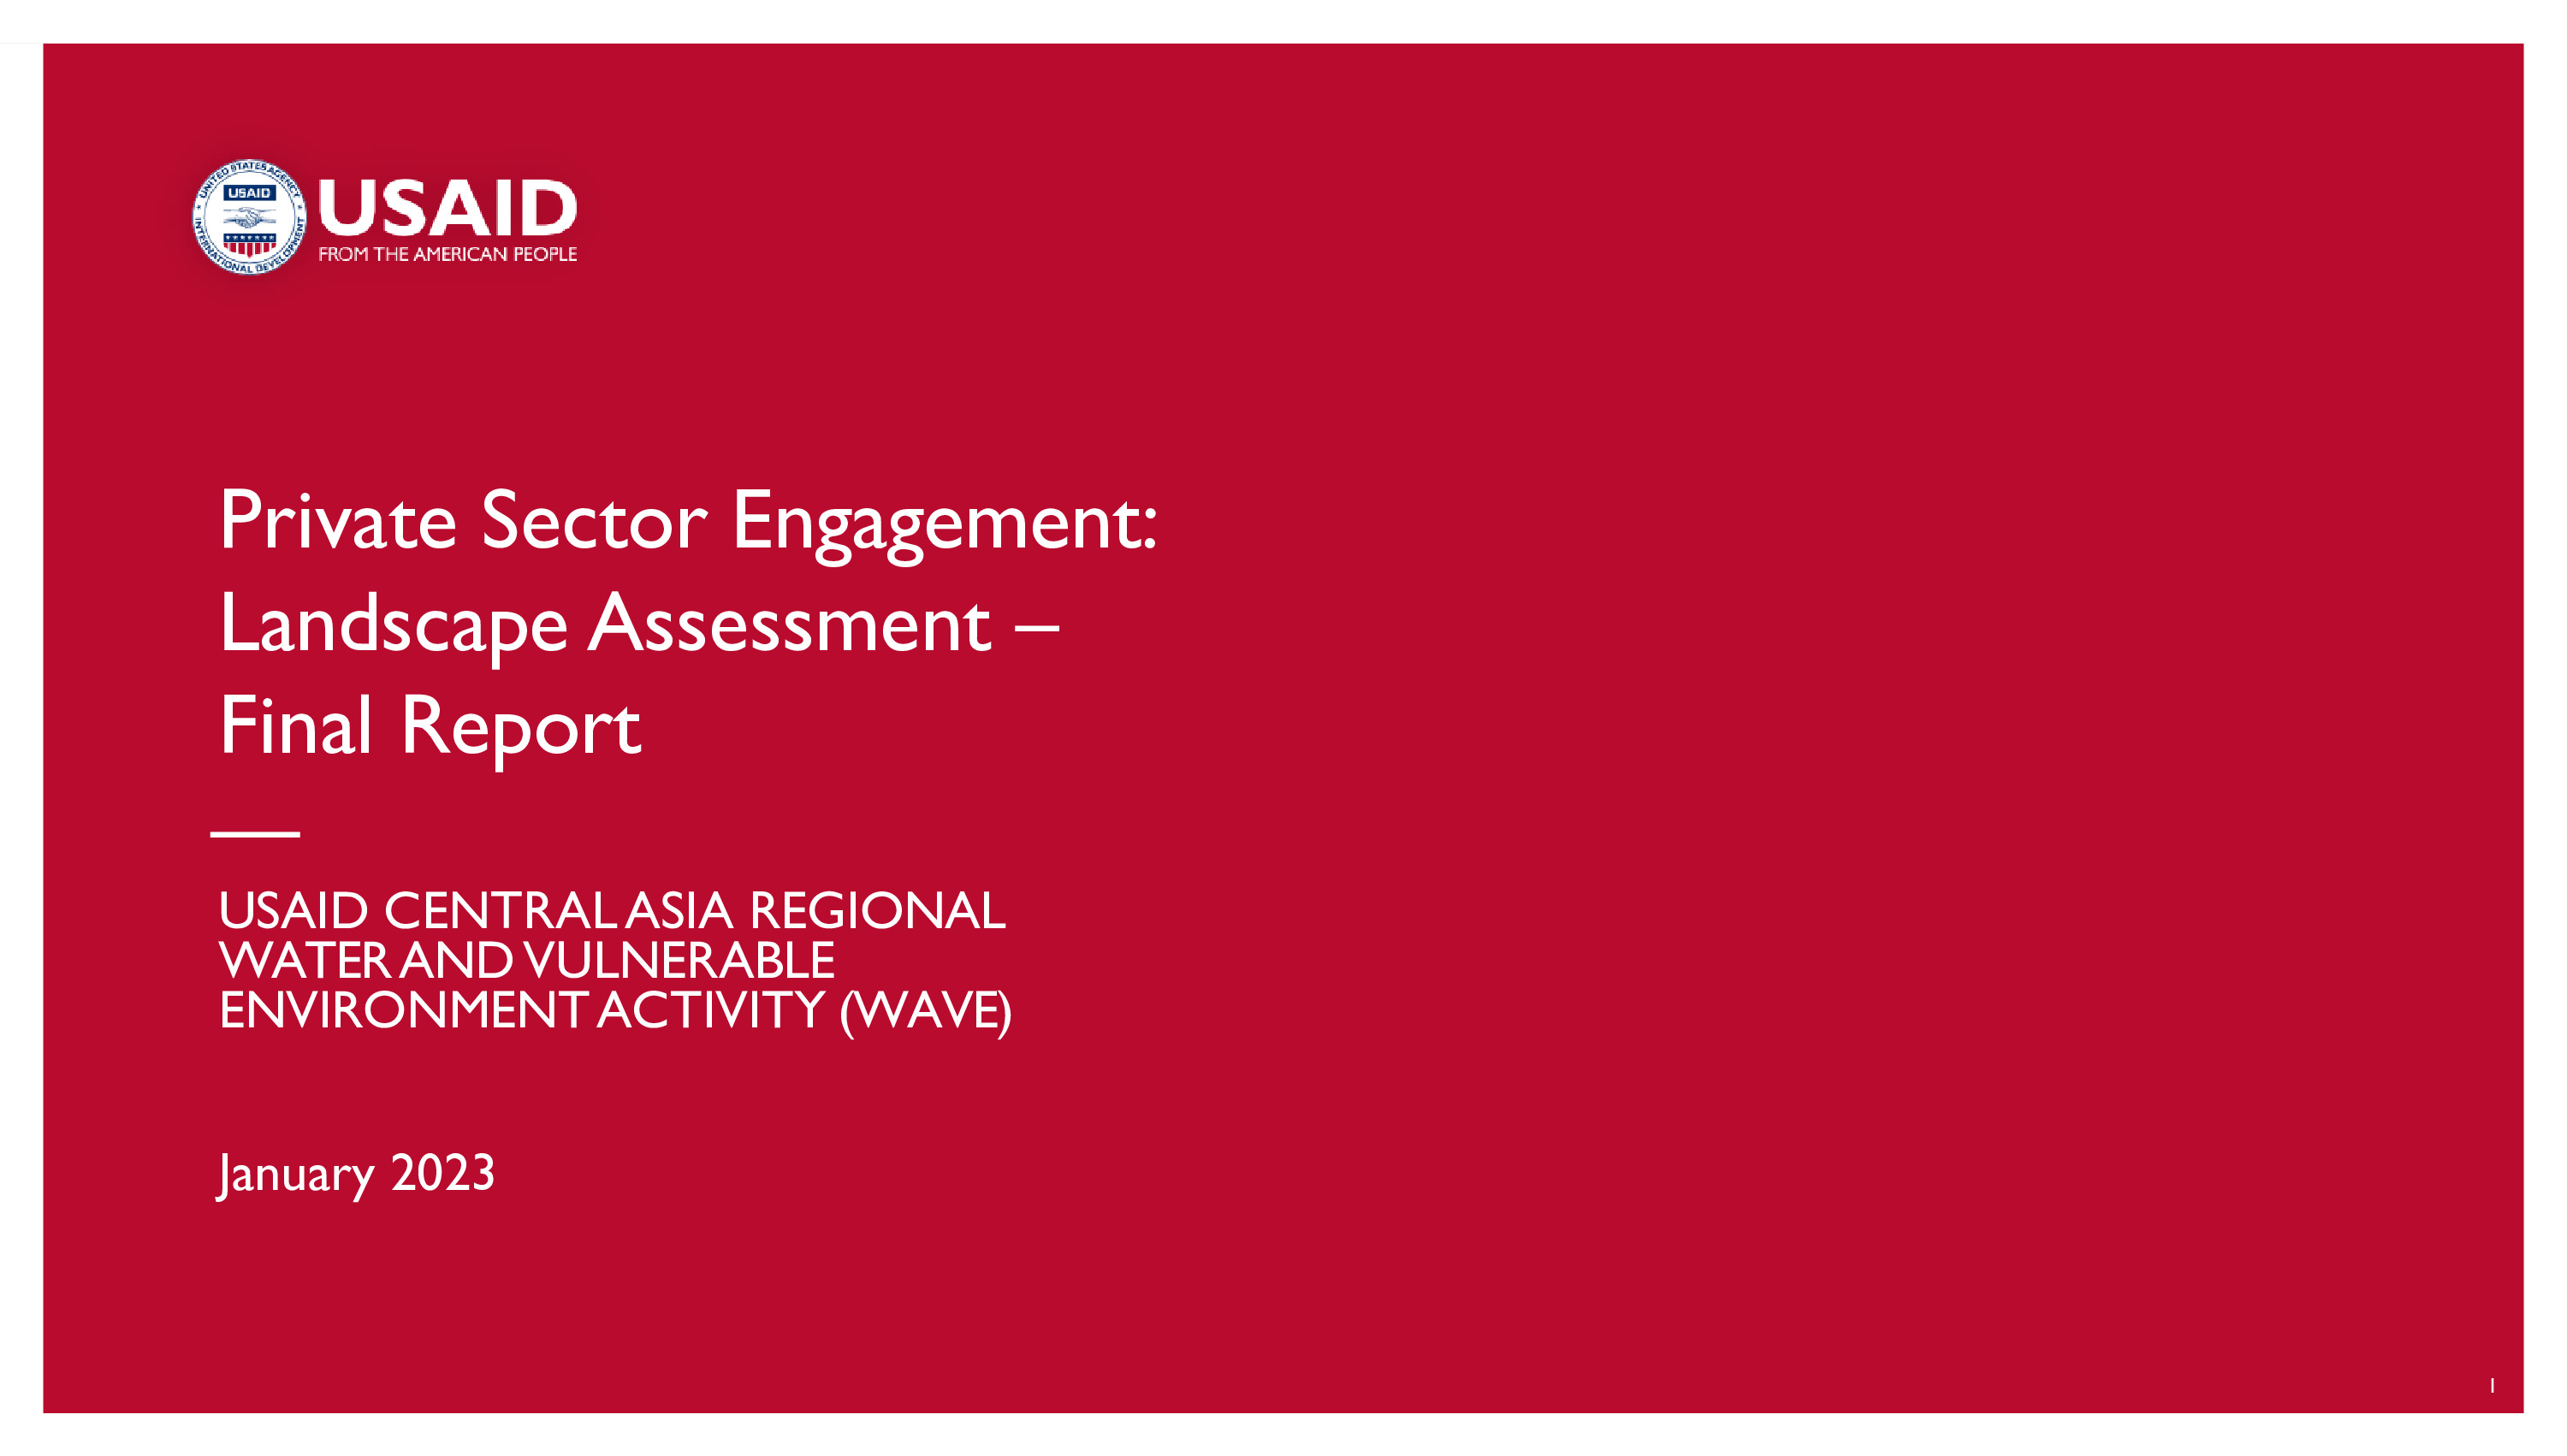 Private Sector Engagement: Landscape Assessment (Final Report), 2023 | USAID Central Asia's  Regional Water and Vulnerable Environment Activity